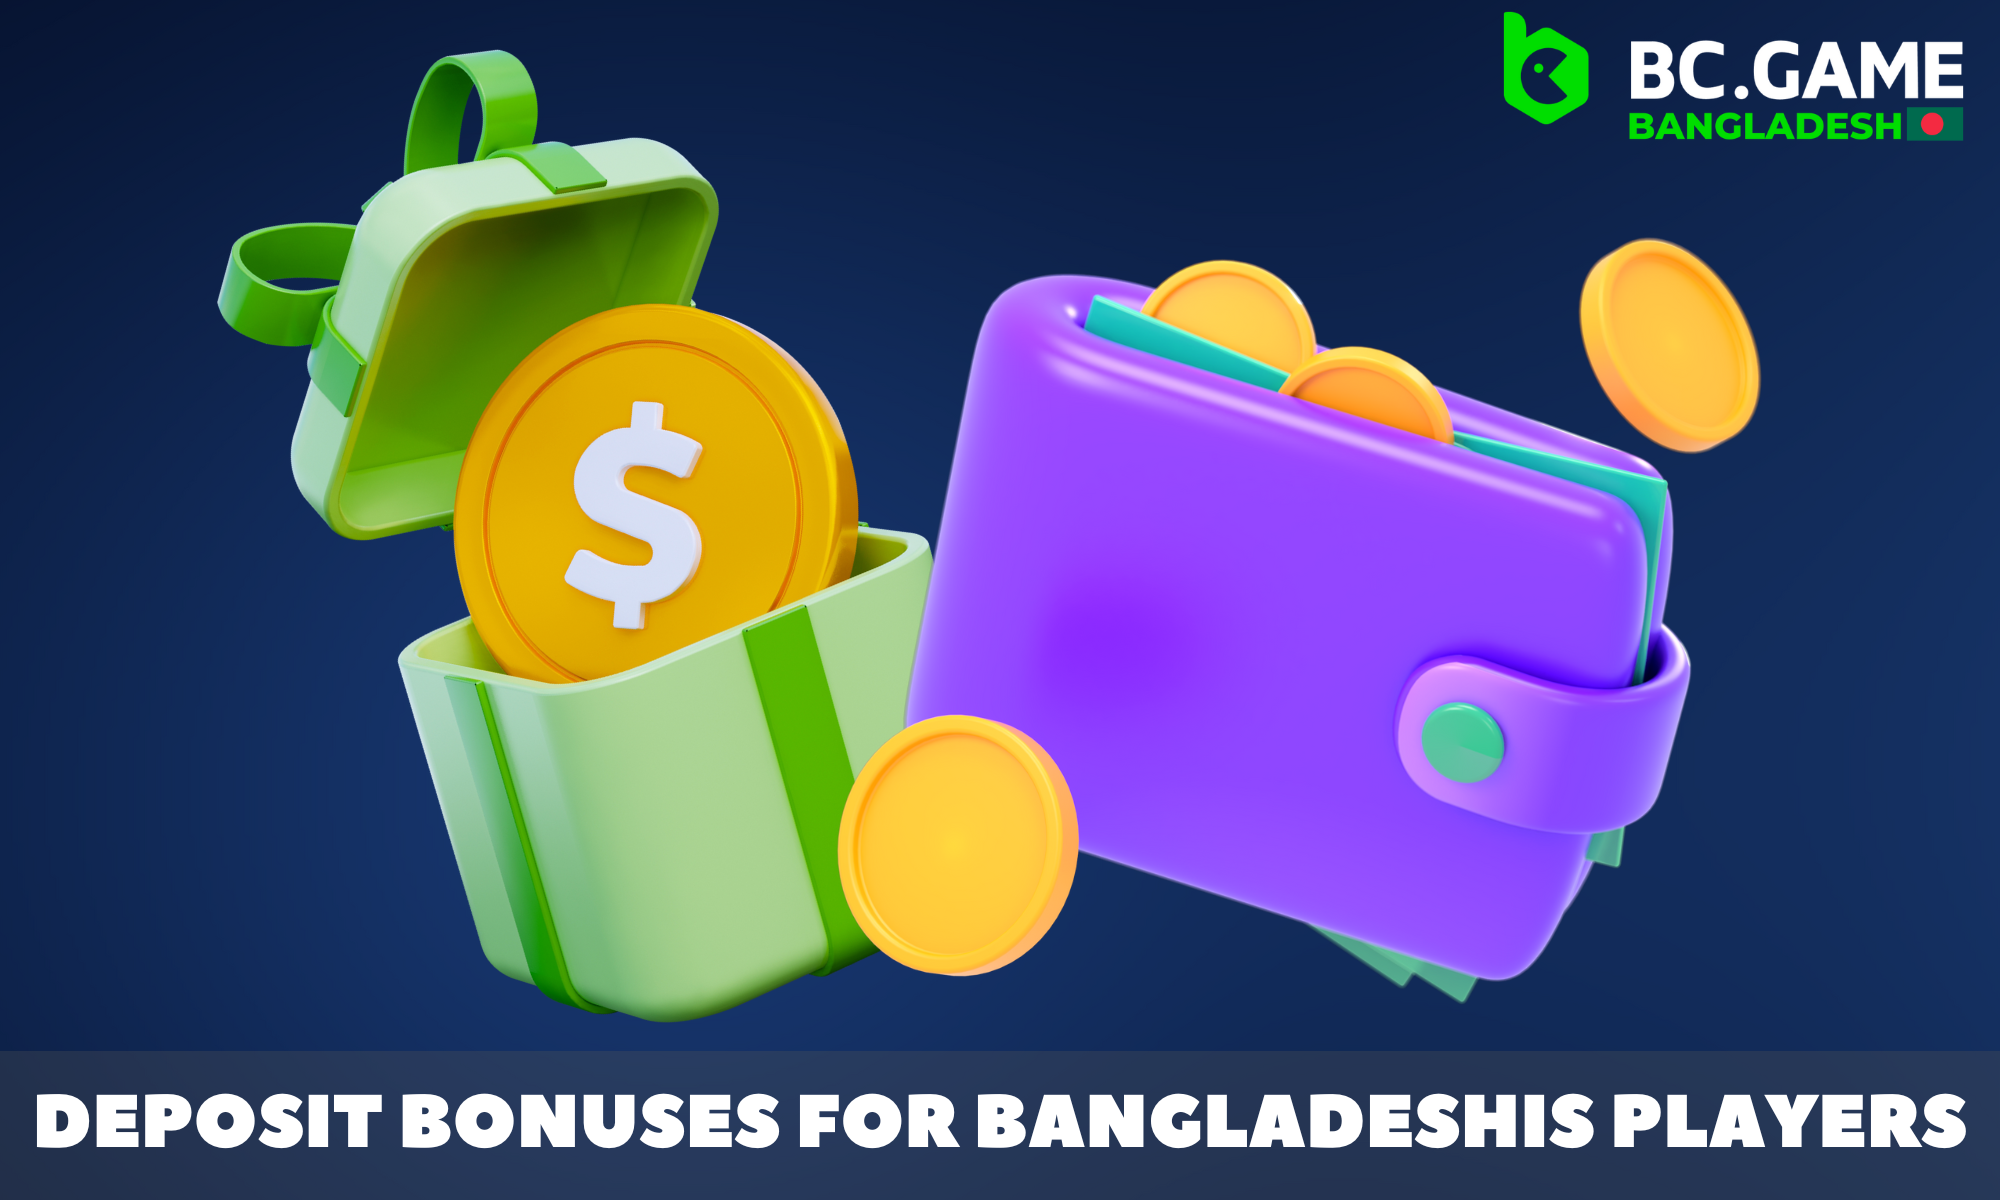 BC Game launches various new bonuses and promotions on a regular basis